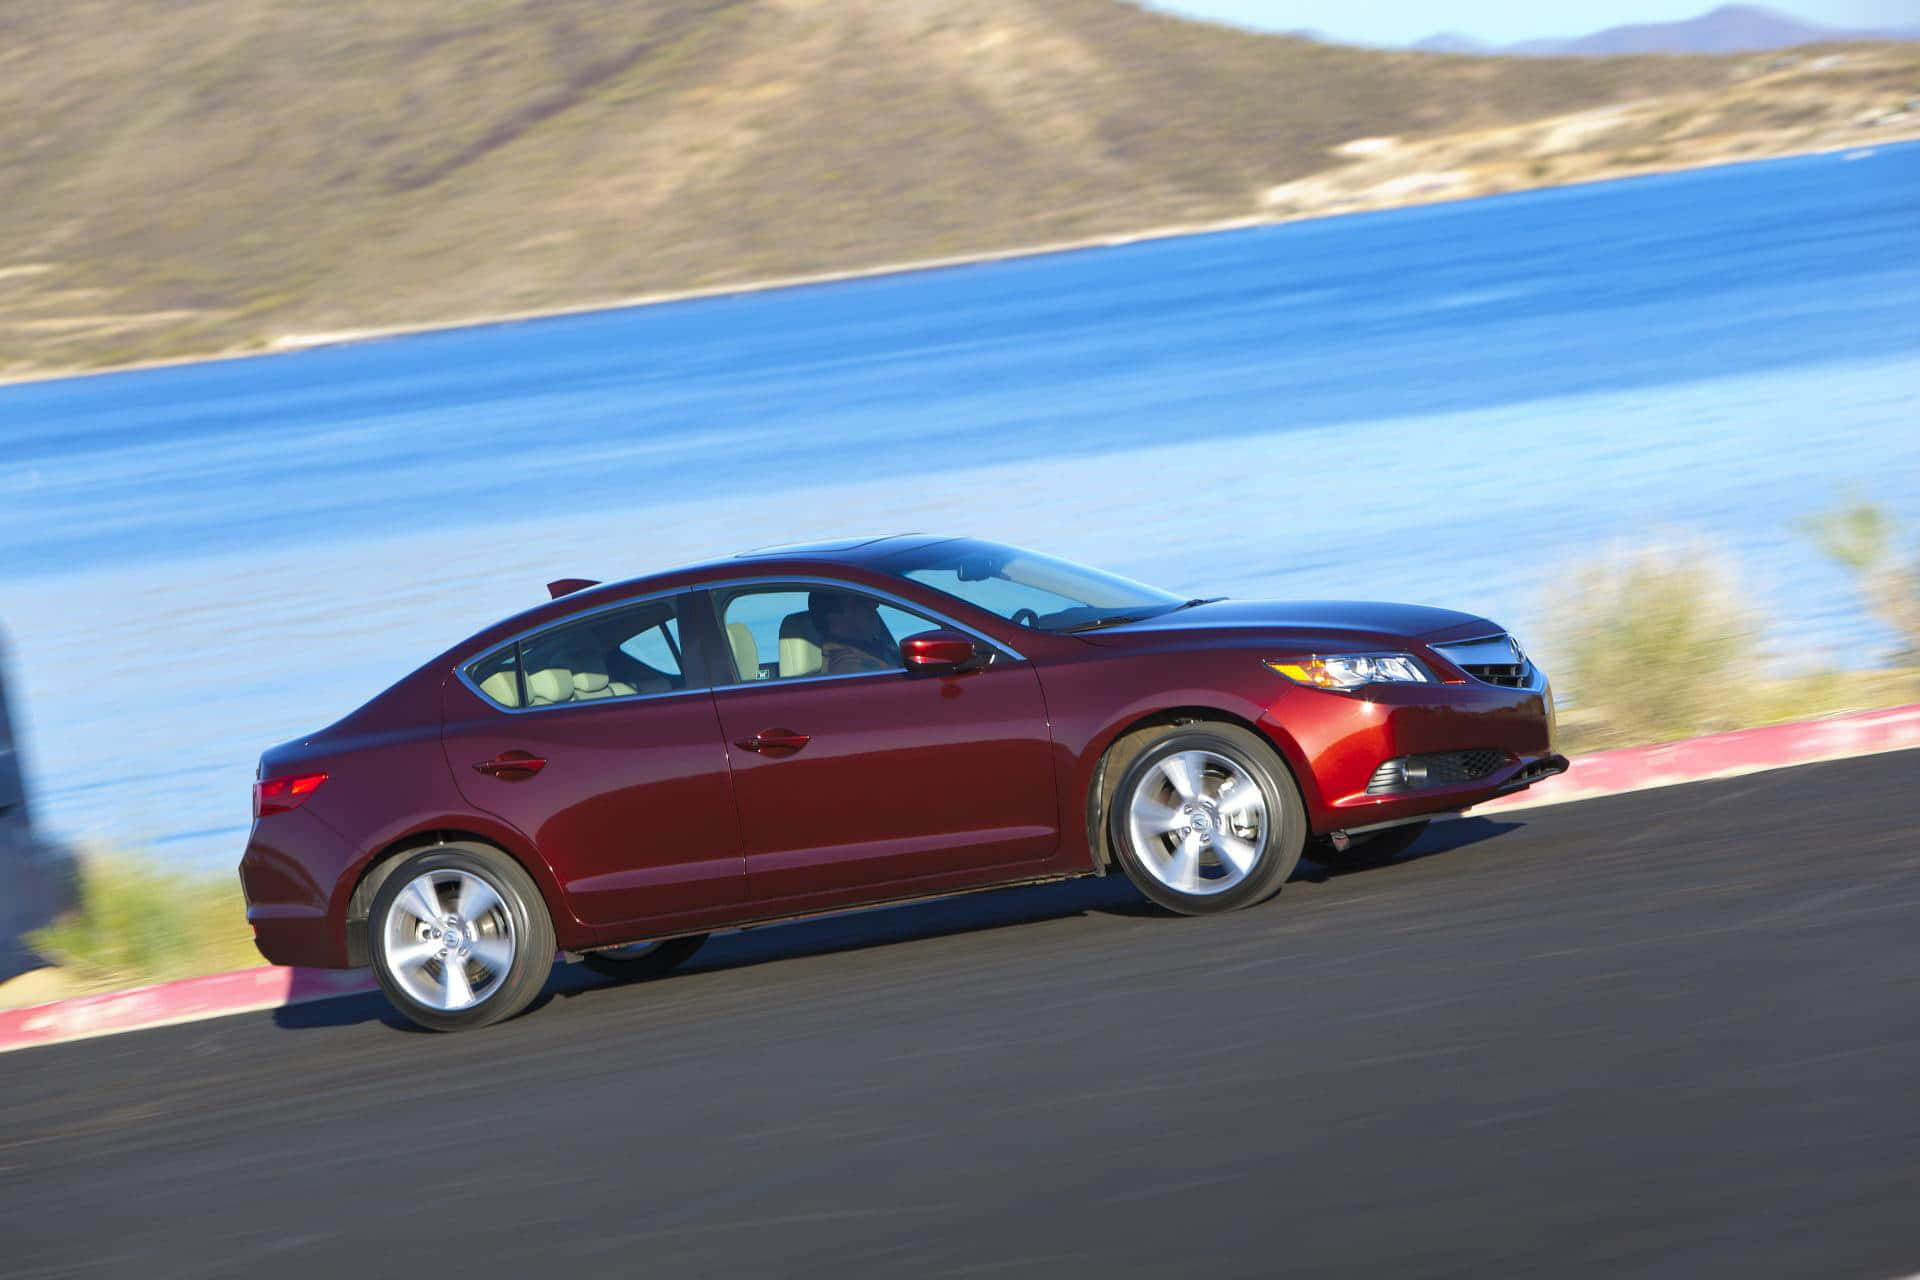 Sleek Acura ILX on the road in a picturesque landscape Wallpaper